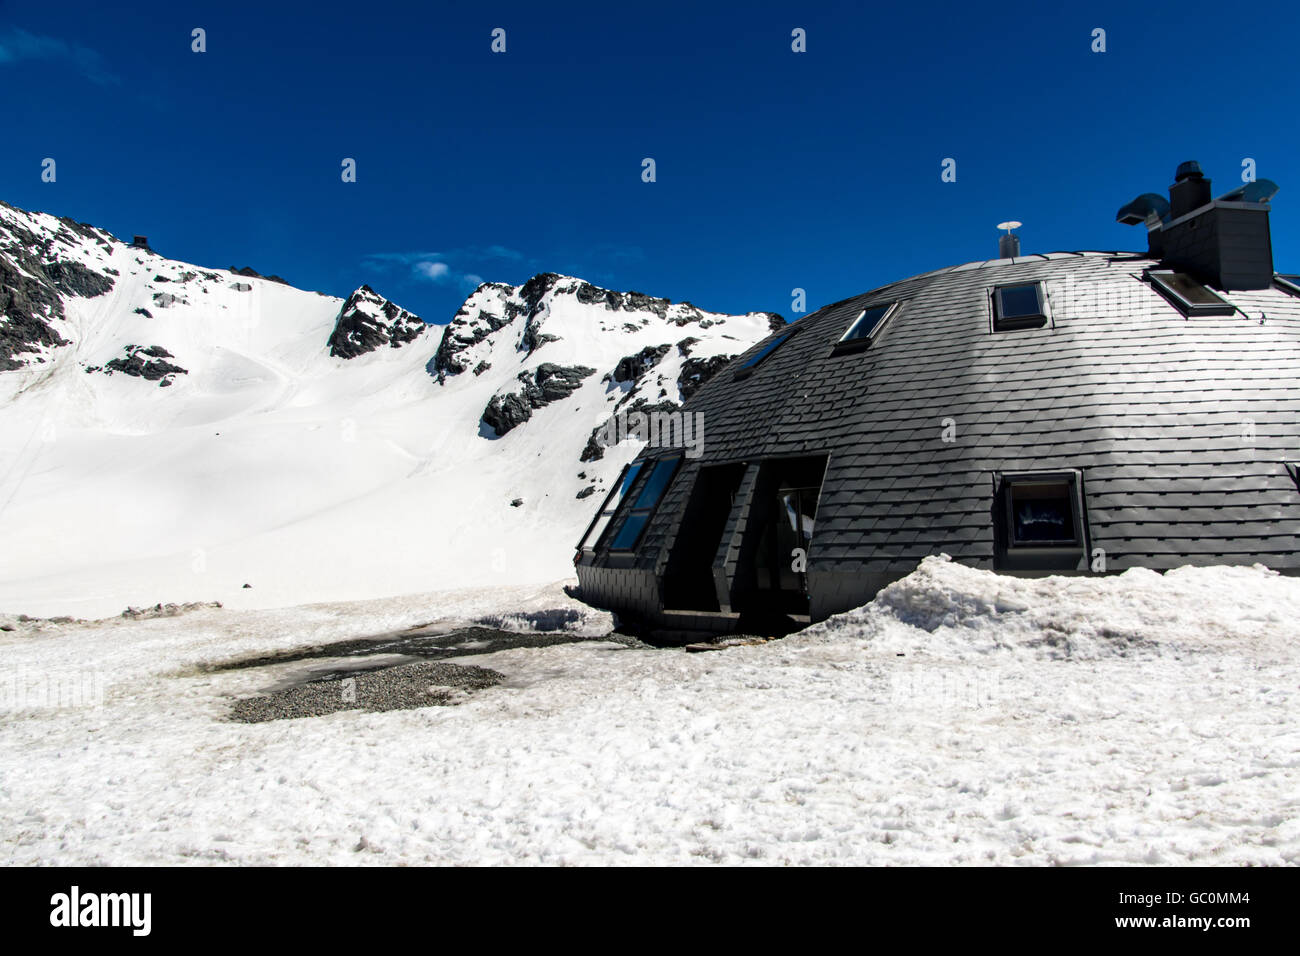 A man-made igloo shelter in Verbier Switzerland in summer Stock Photo